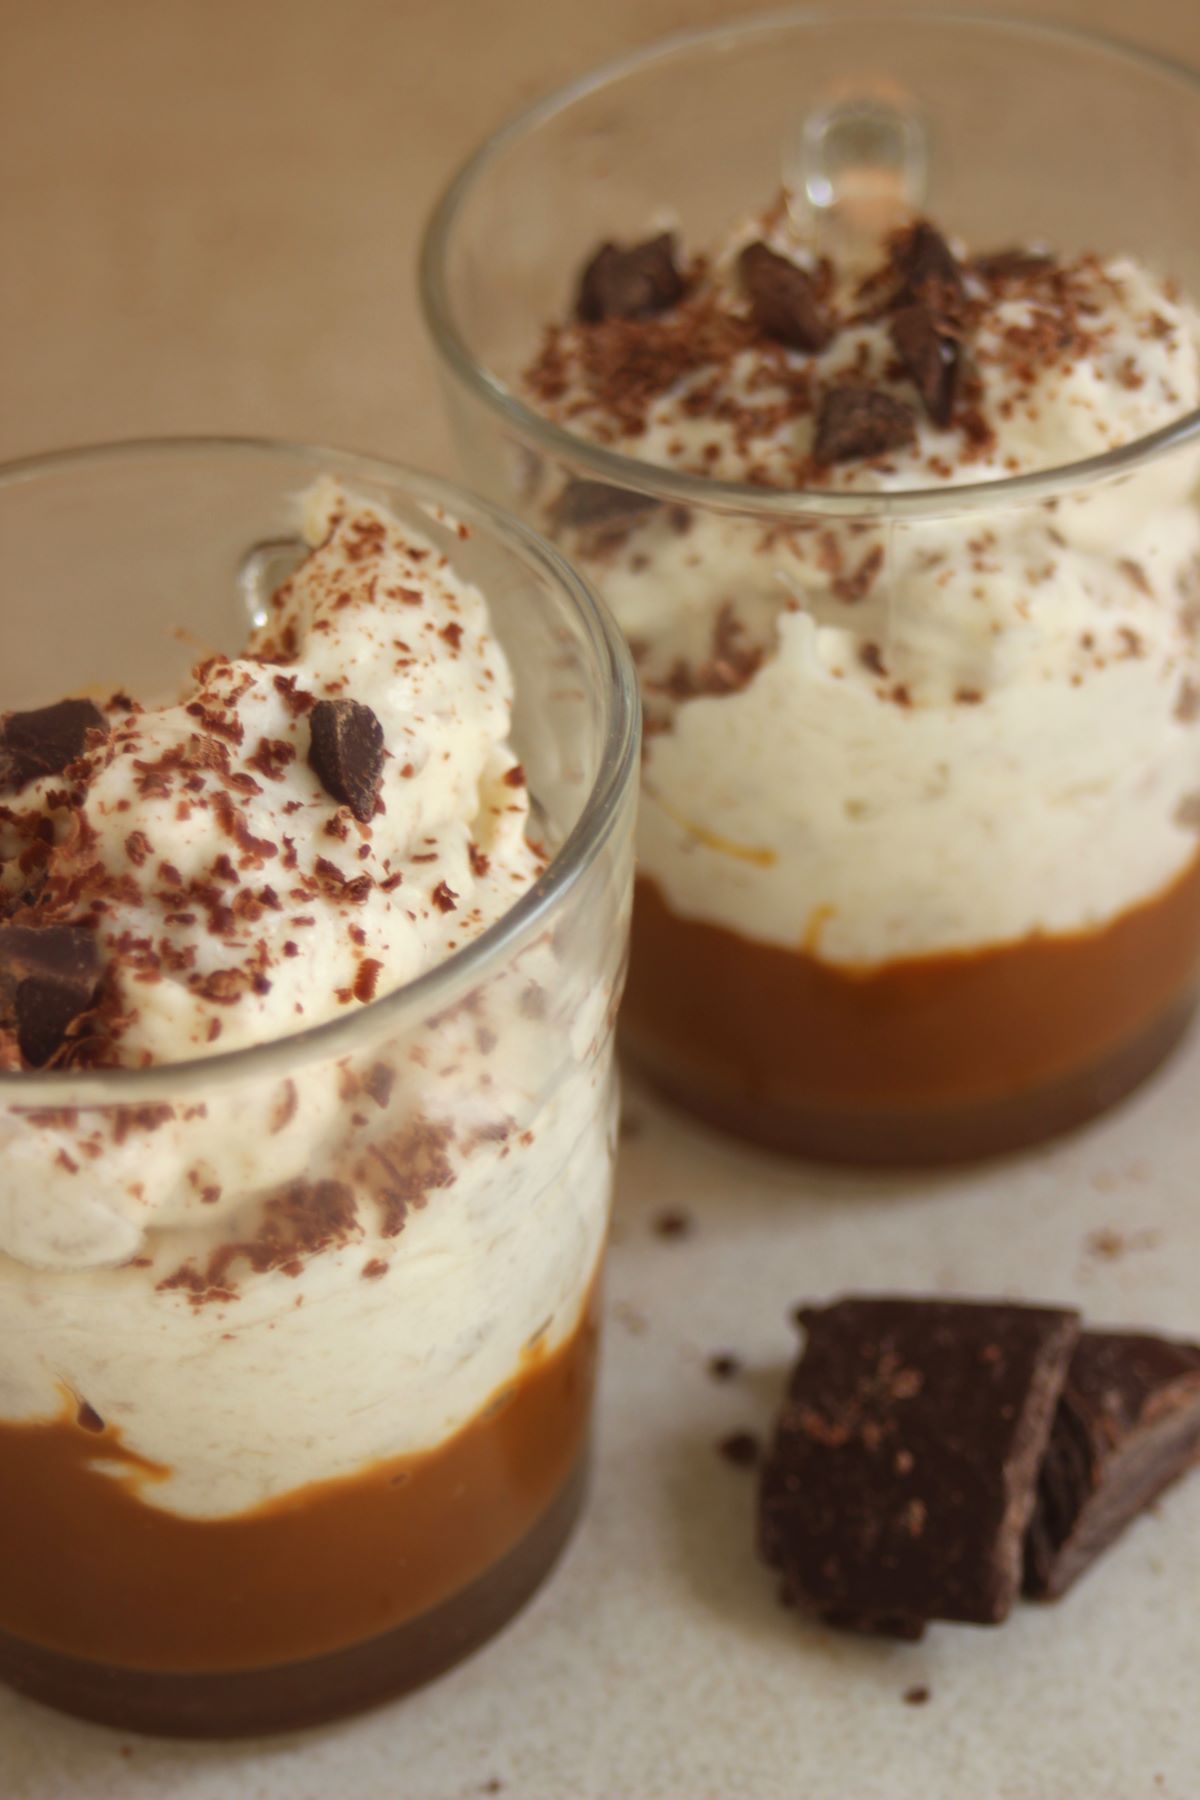 Two glasses with dulce de leche, banana cream, and shredded chocolate. Chocolate chunks on the surface.